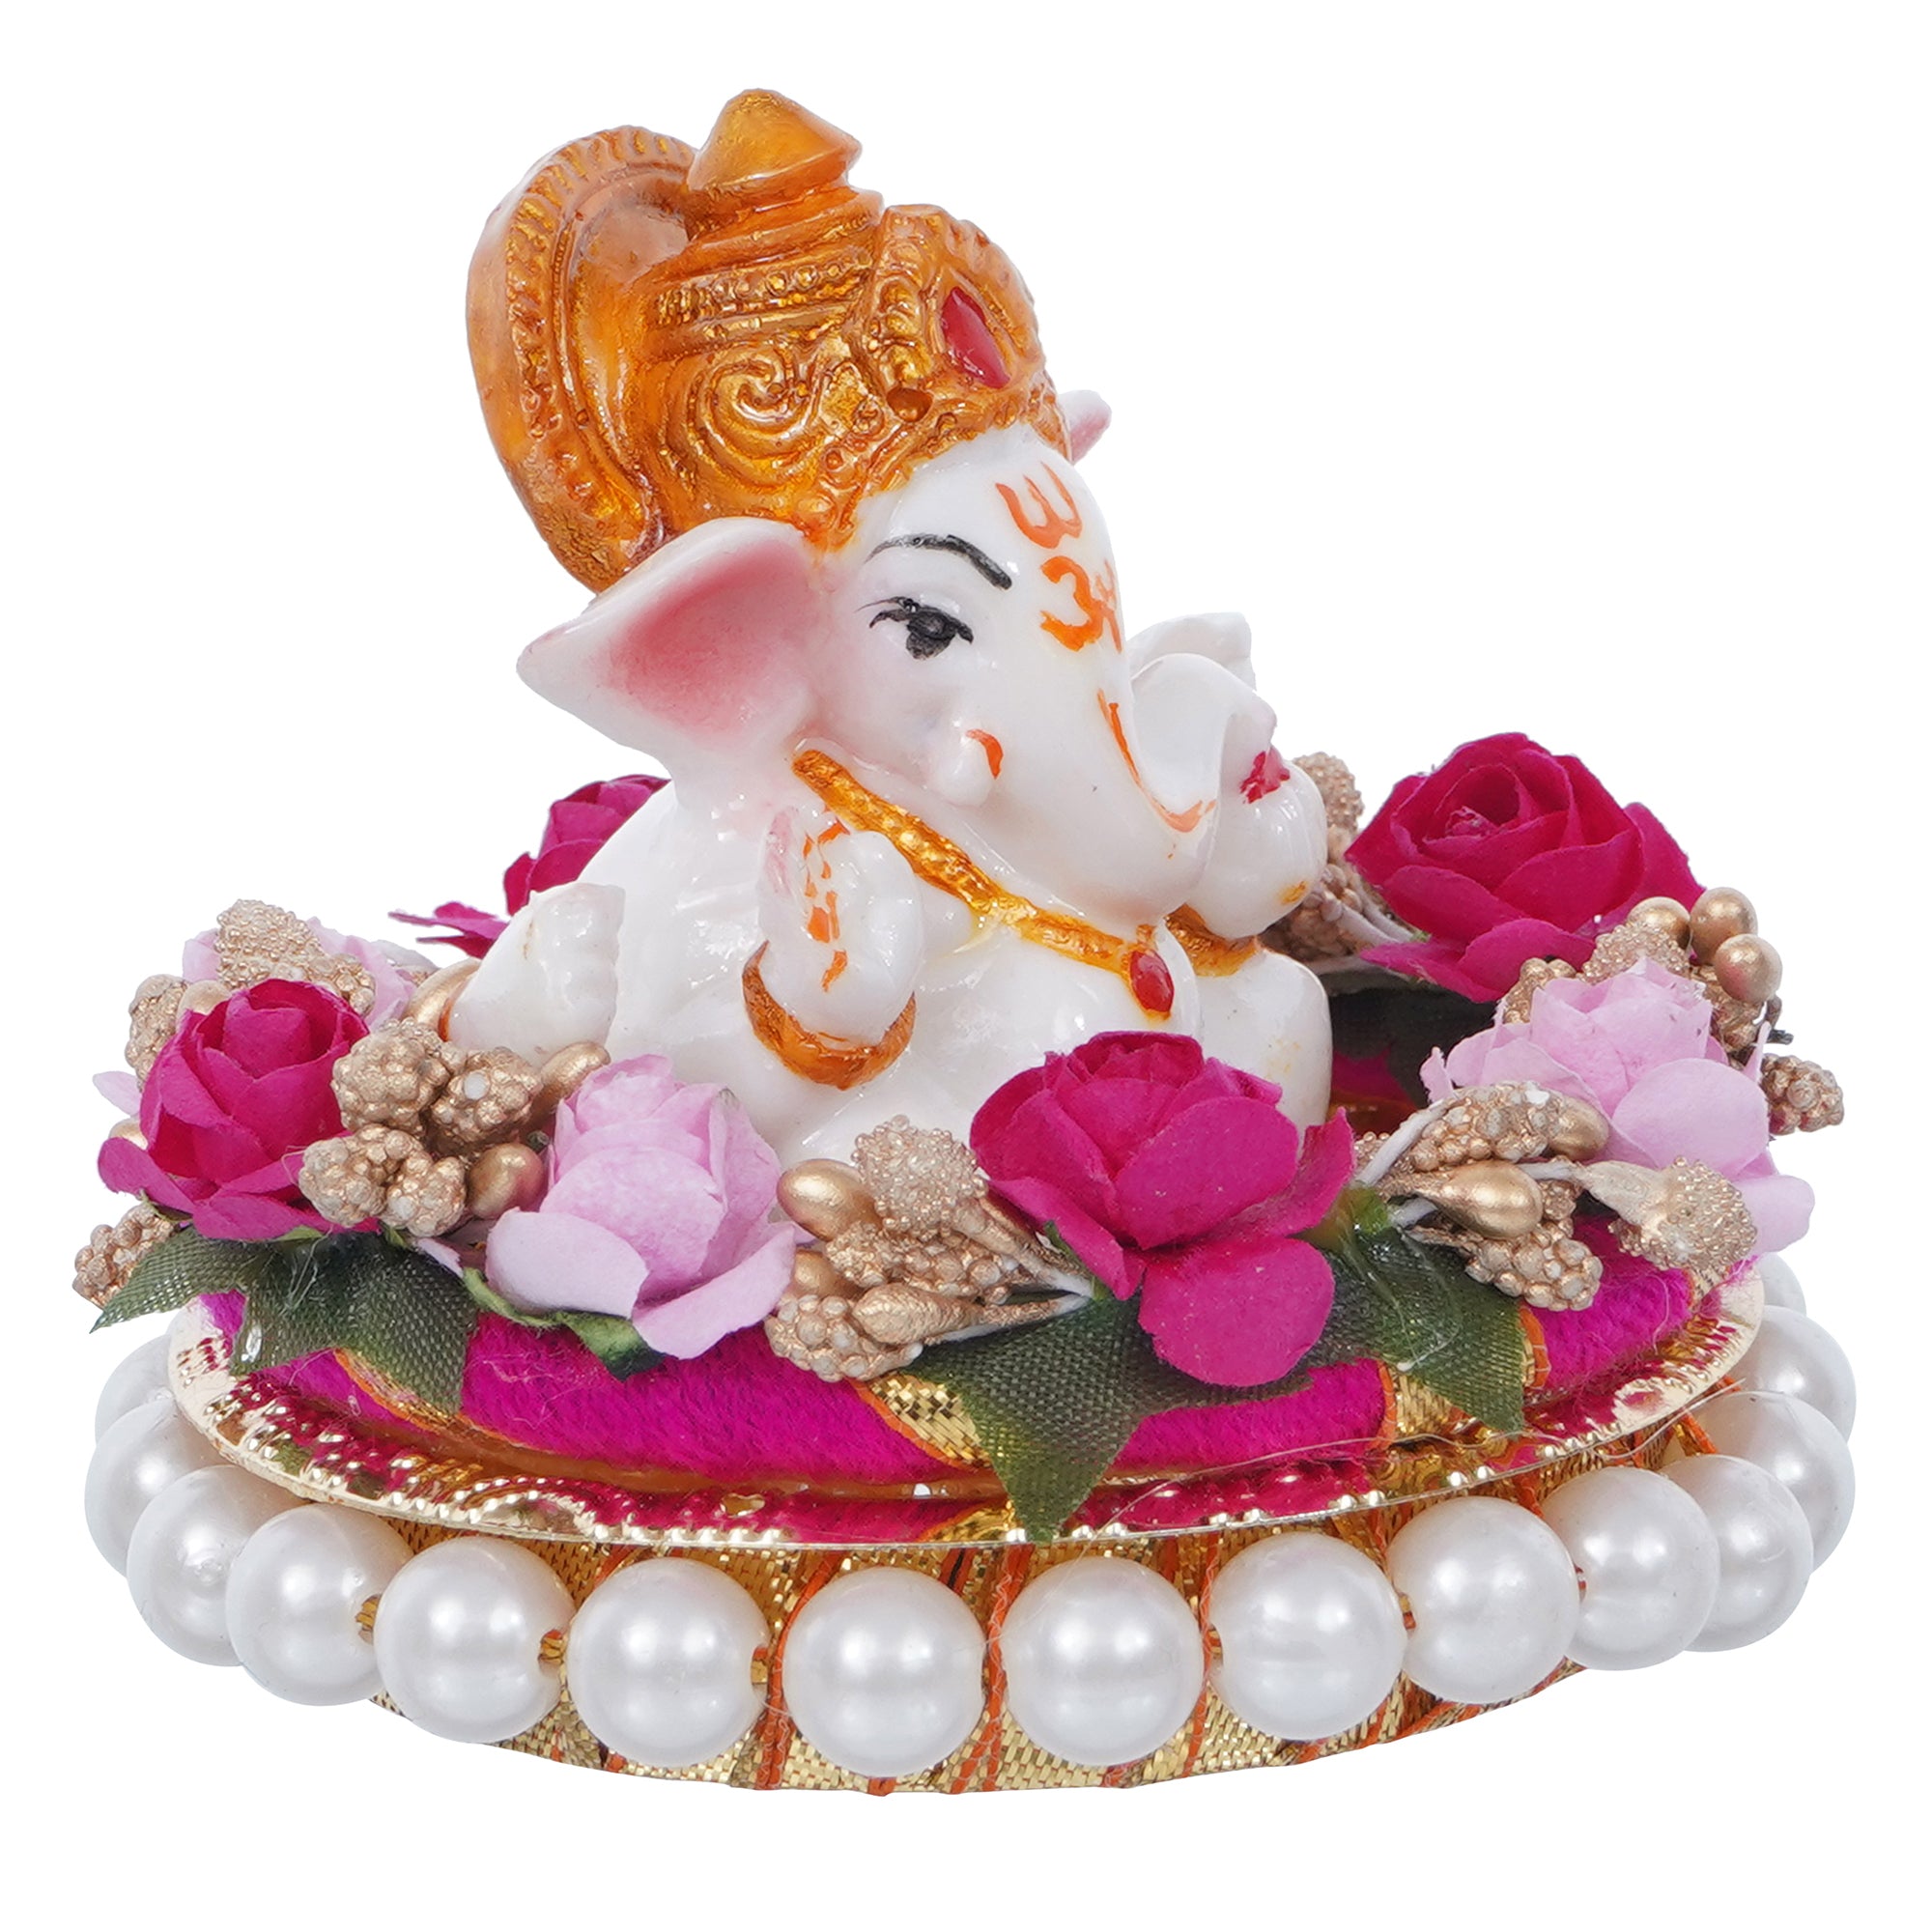 Lord Ganesha Idol On Decorative Handcrafted Colorful Flowers Plate 4